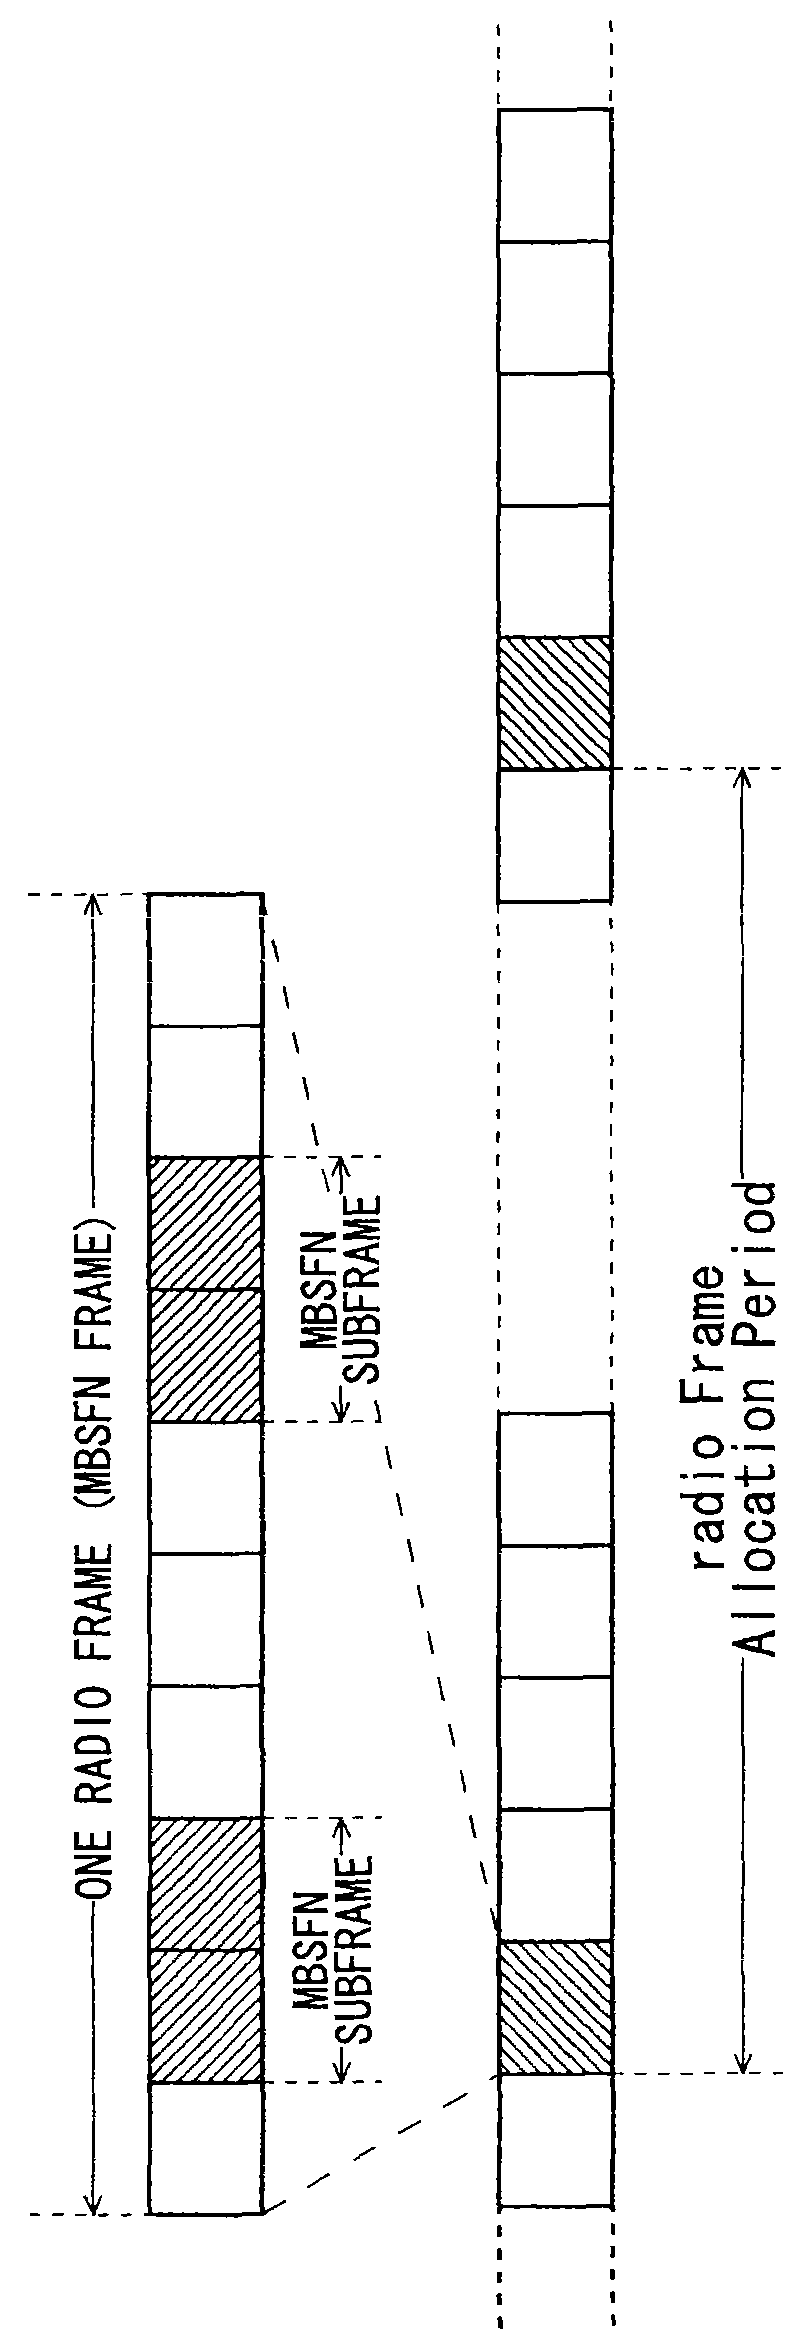 Base station device and communication system for communicating using a non-associated cell, an asymmetrical cell, a frequency band for downlink, or a frequency band for uplink